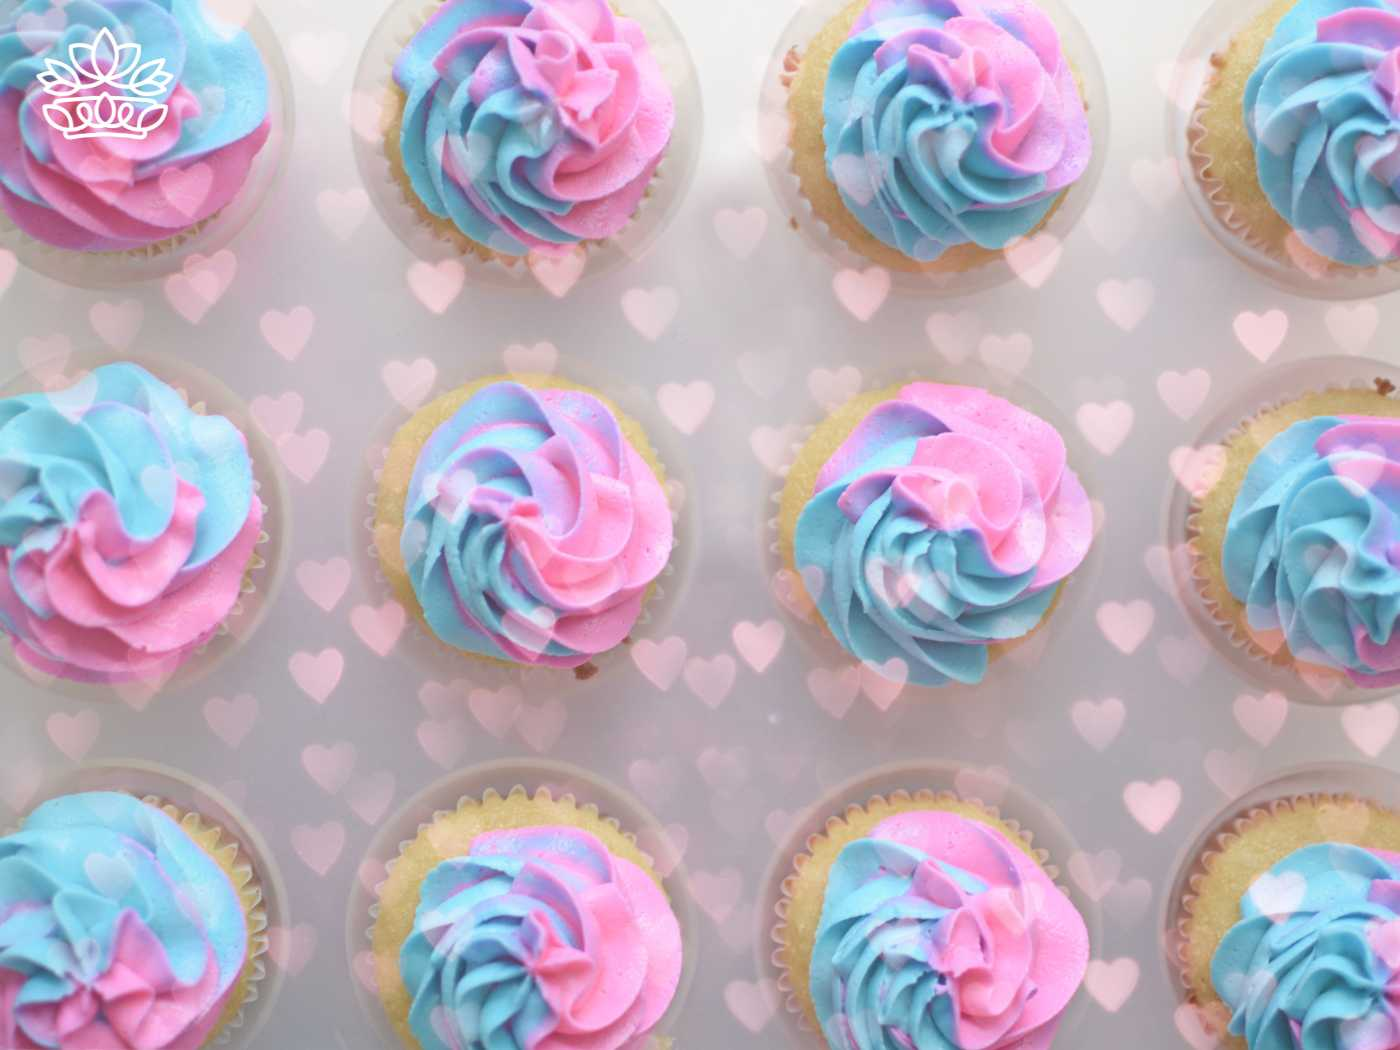 Cupcakes decorated with swirls of blue and pink icing arranged neatly with heart overlays, from the Gender Reveal Collection at Fabulous Flowers and Gifts.